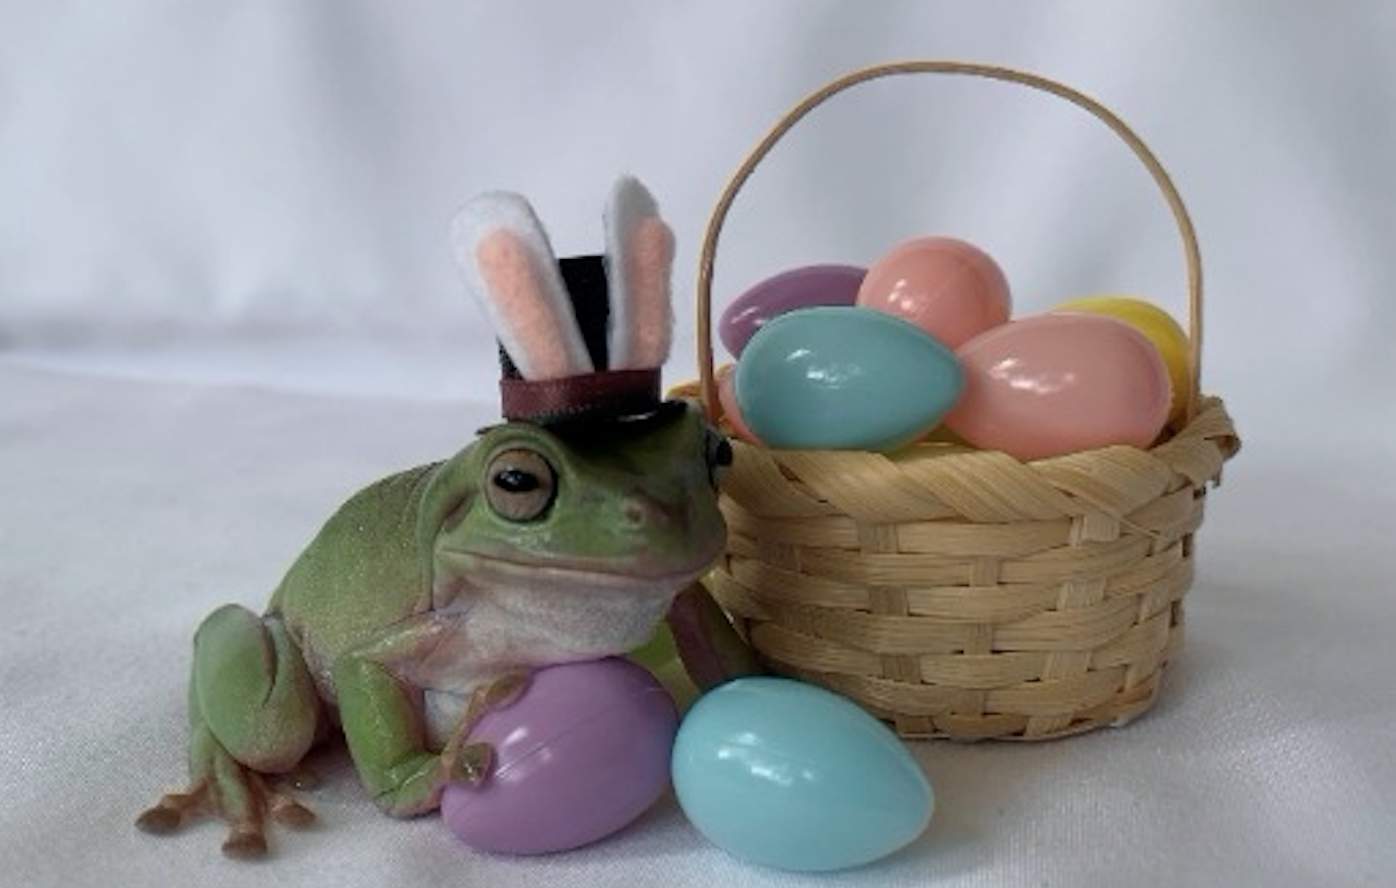 Orlando frog wants to be this year’s Cadbury Bunny. Here’s how to vote.